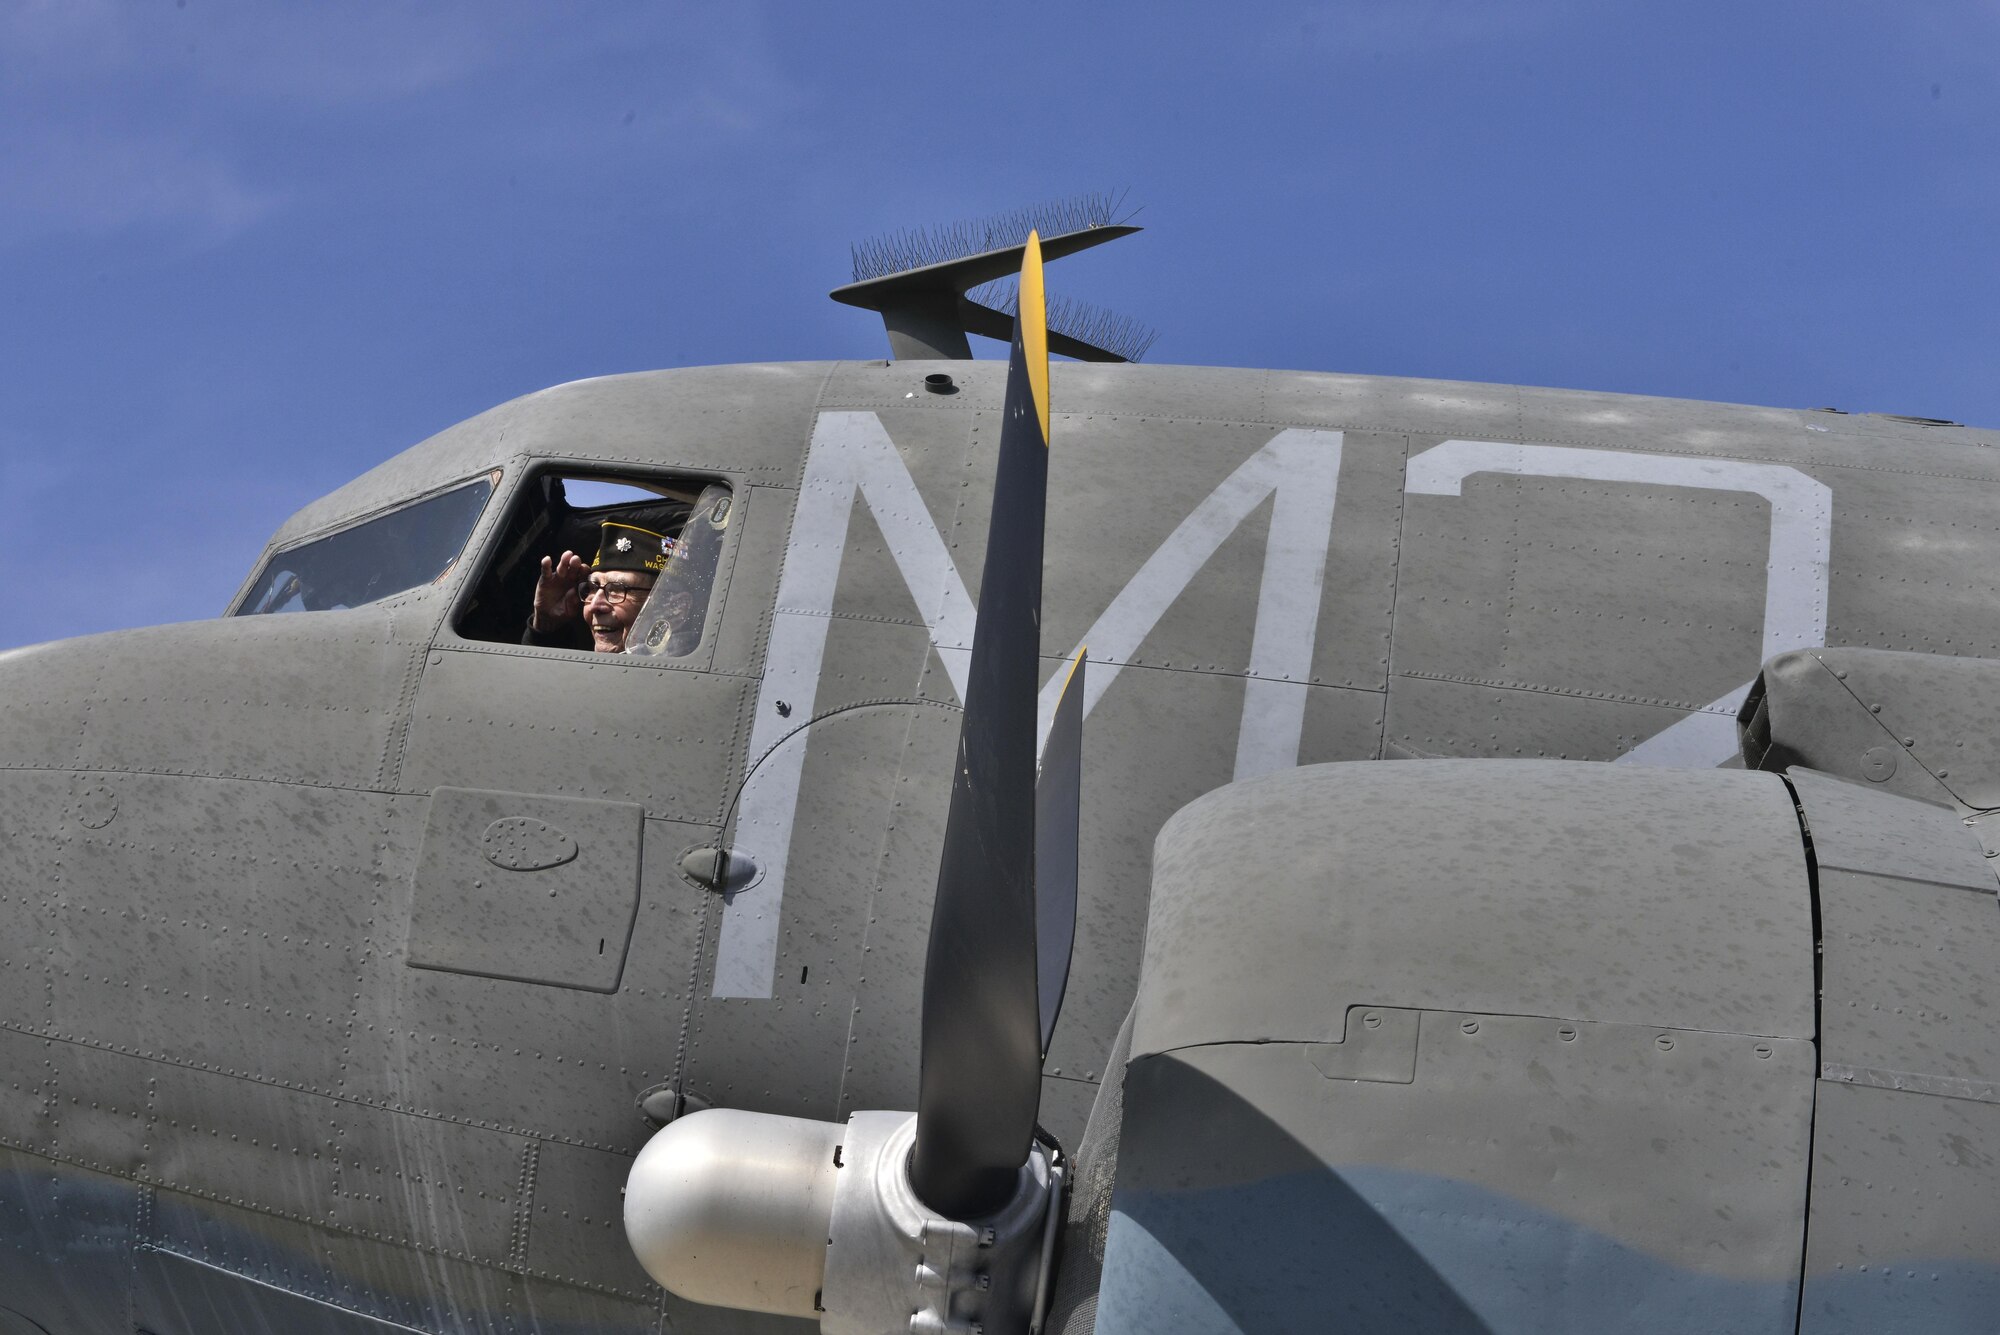 Retired Lt. Col. Alston Daniels salutes out of the window of a Douglas C-47D Skytrain on static display at Fairchild Air Force Base, Wash., April 7, 2015. Daniels flew the C-47 during World War II and logged nearly 2,000 hours in the aircraft. (U.S. Air Force photo/Staff Sgt. Alex Montes)